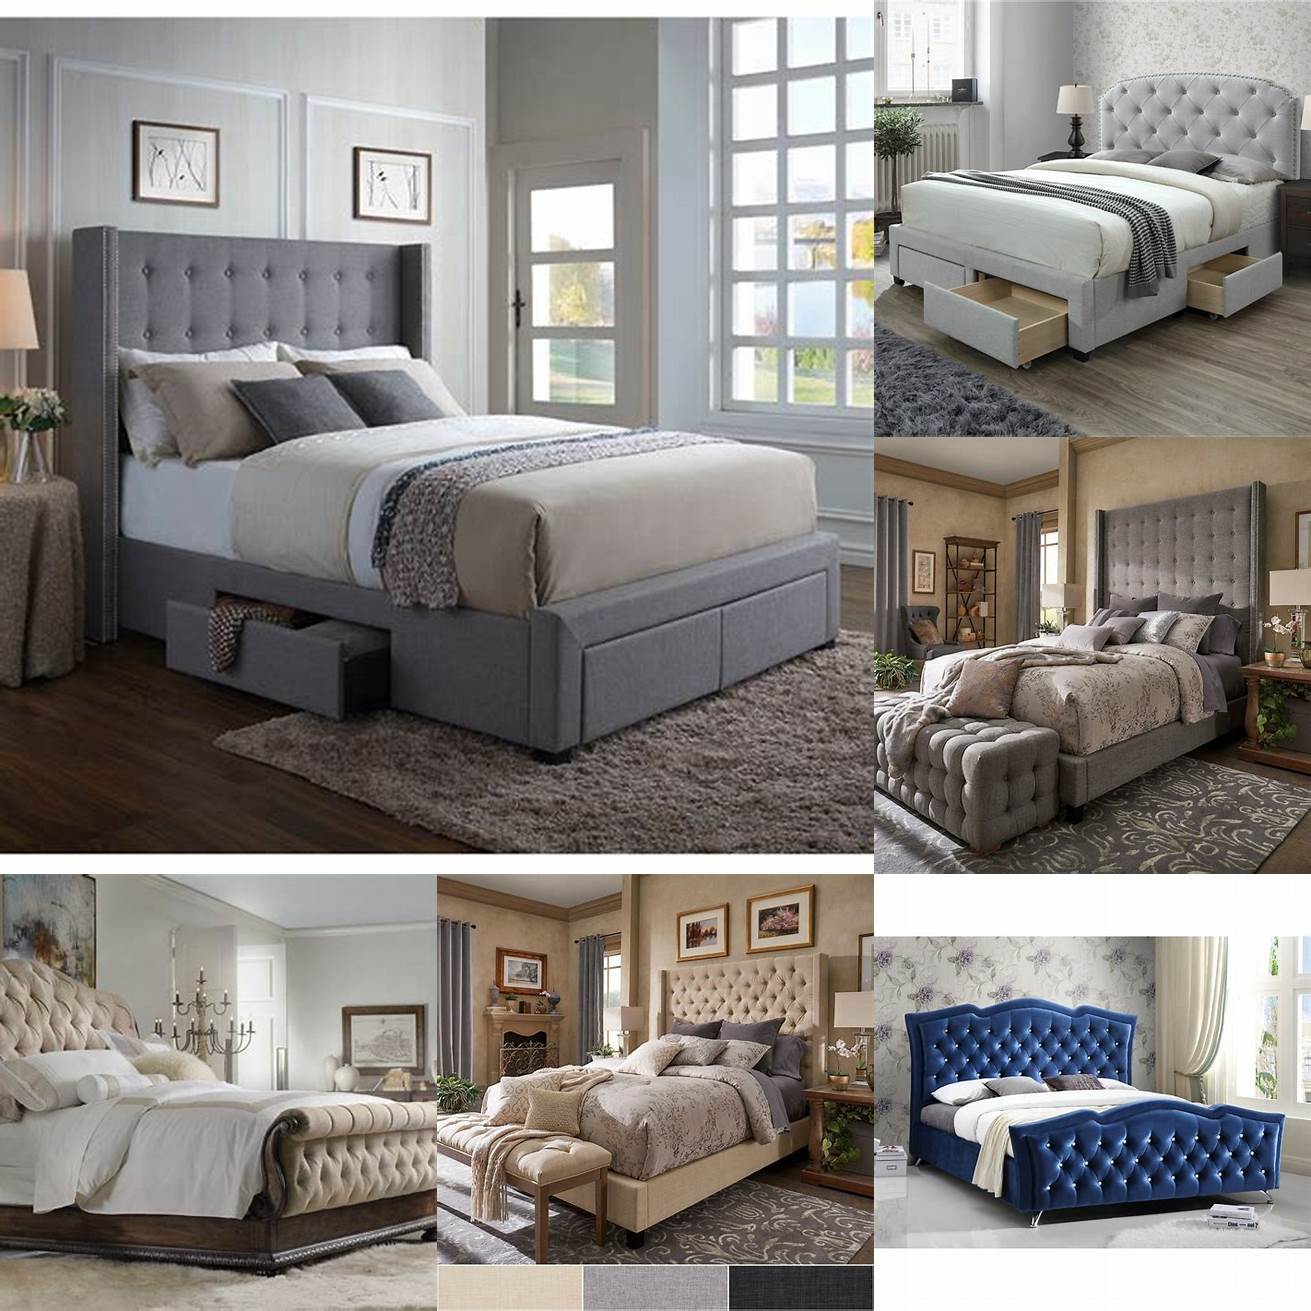 Weight Tufted beds can be heavy and bulky which can make them difficult to move around or transport if you need to move to a new house